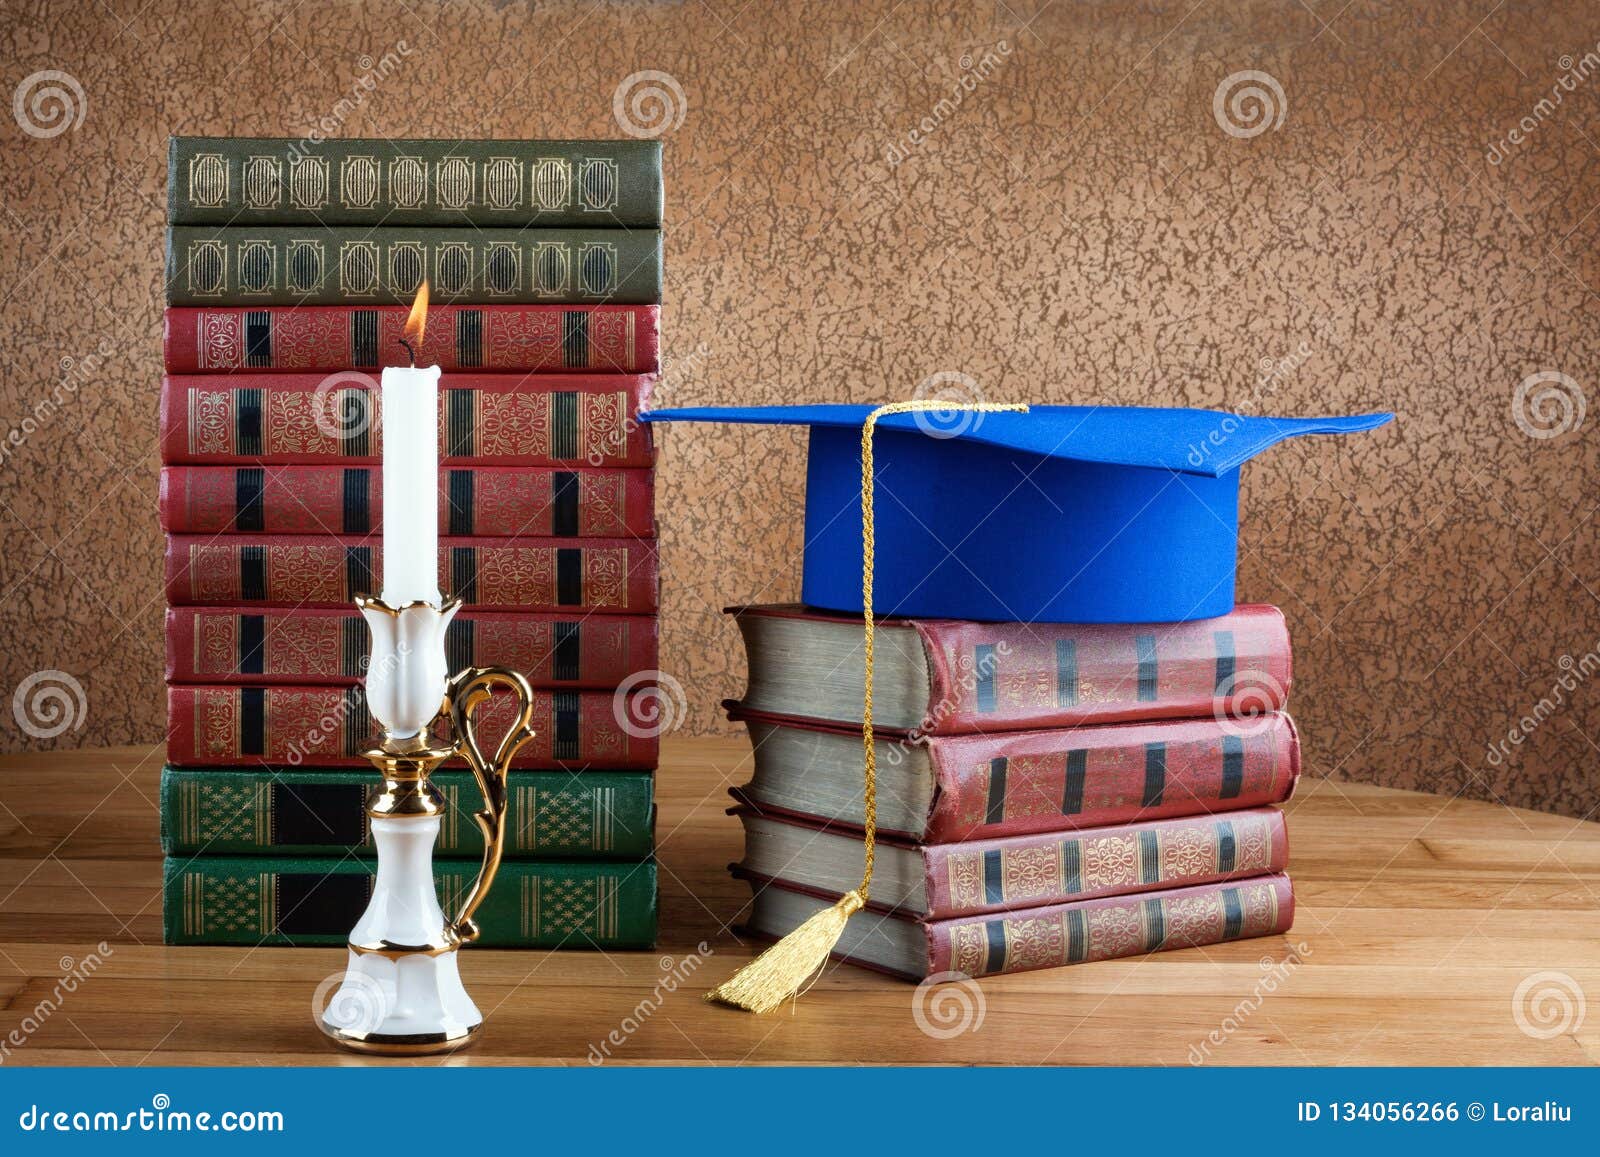 Graduation Mortarboard On Top Of Stack Of Books On Wooden Table